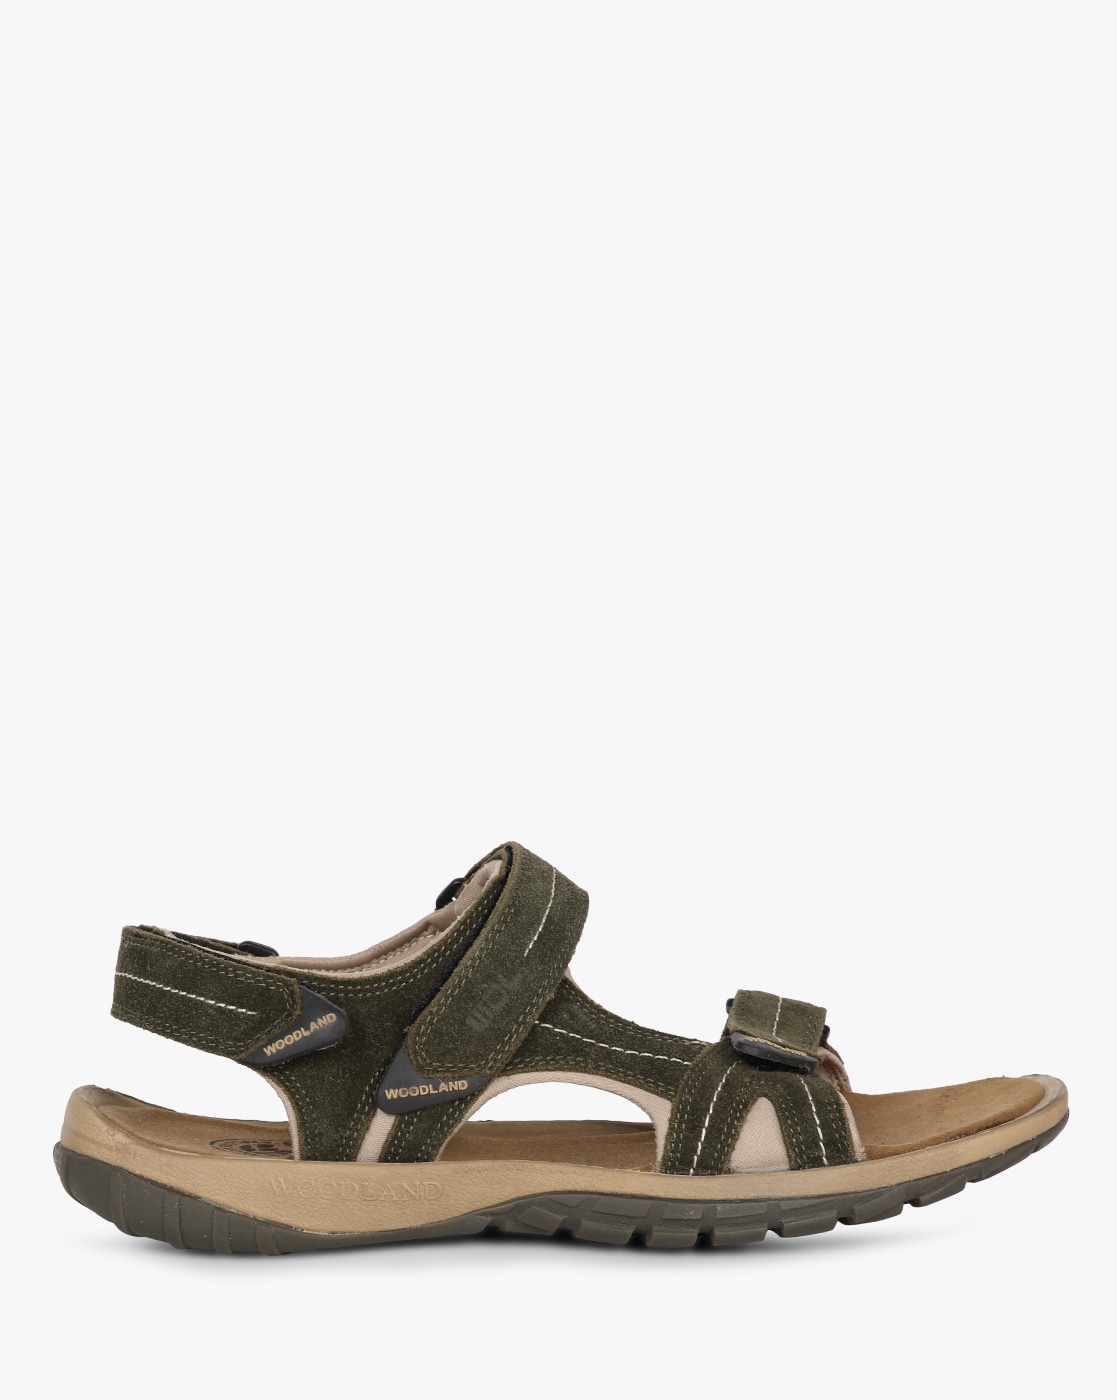 Buy Woodland Sandals For Men ( Multi-Color ) Online at Low Prices in India  - Paytmmall.com